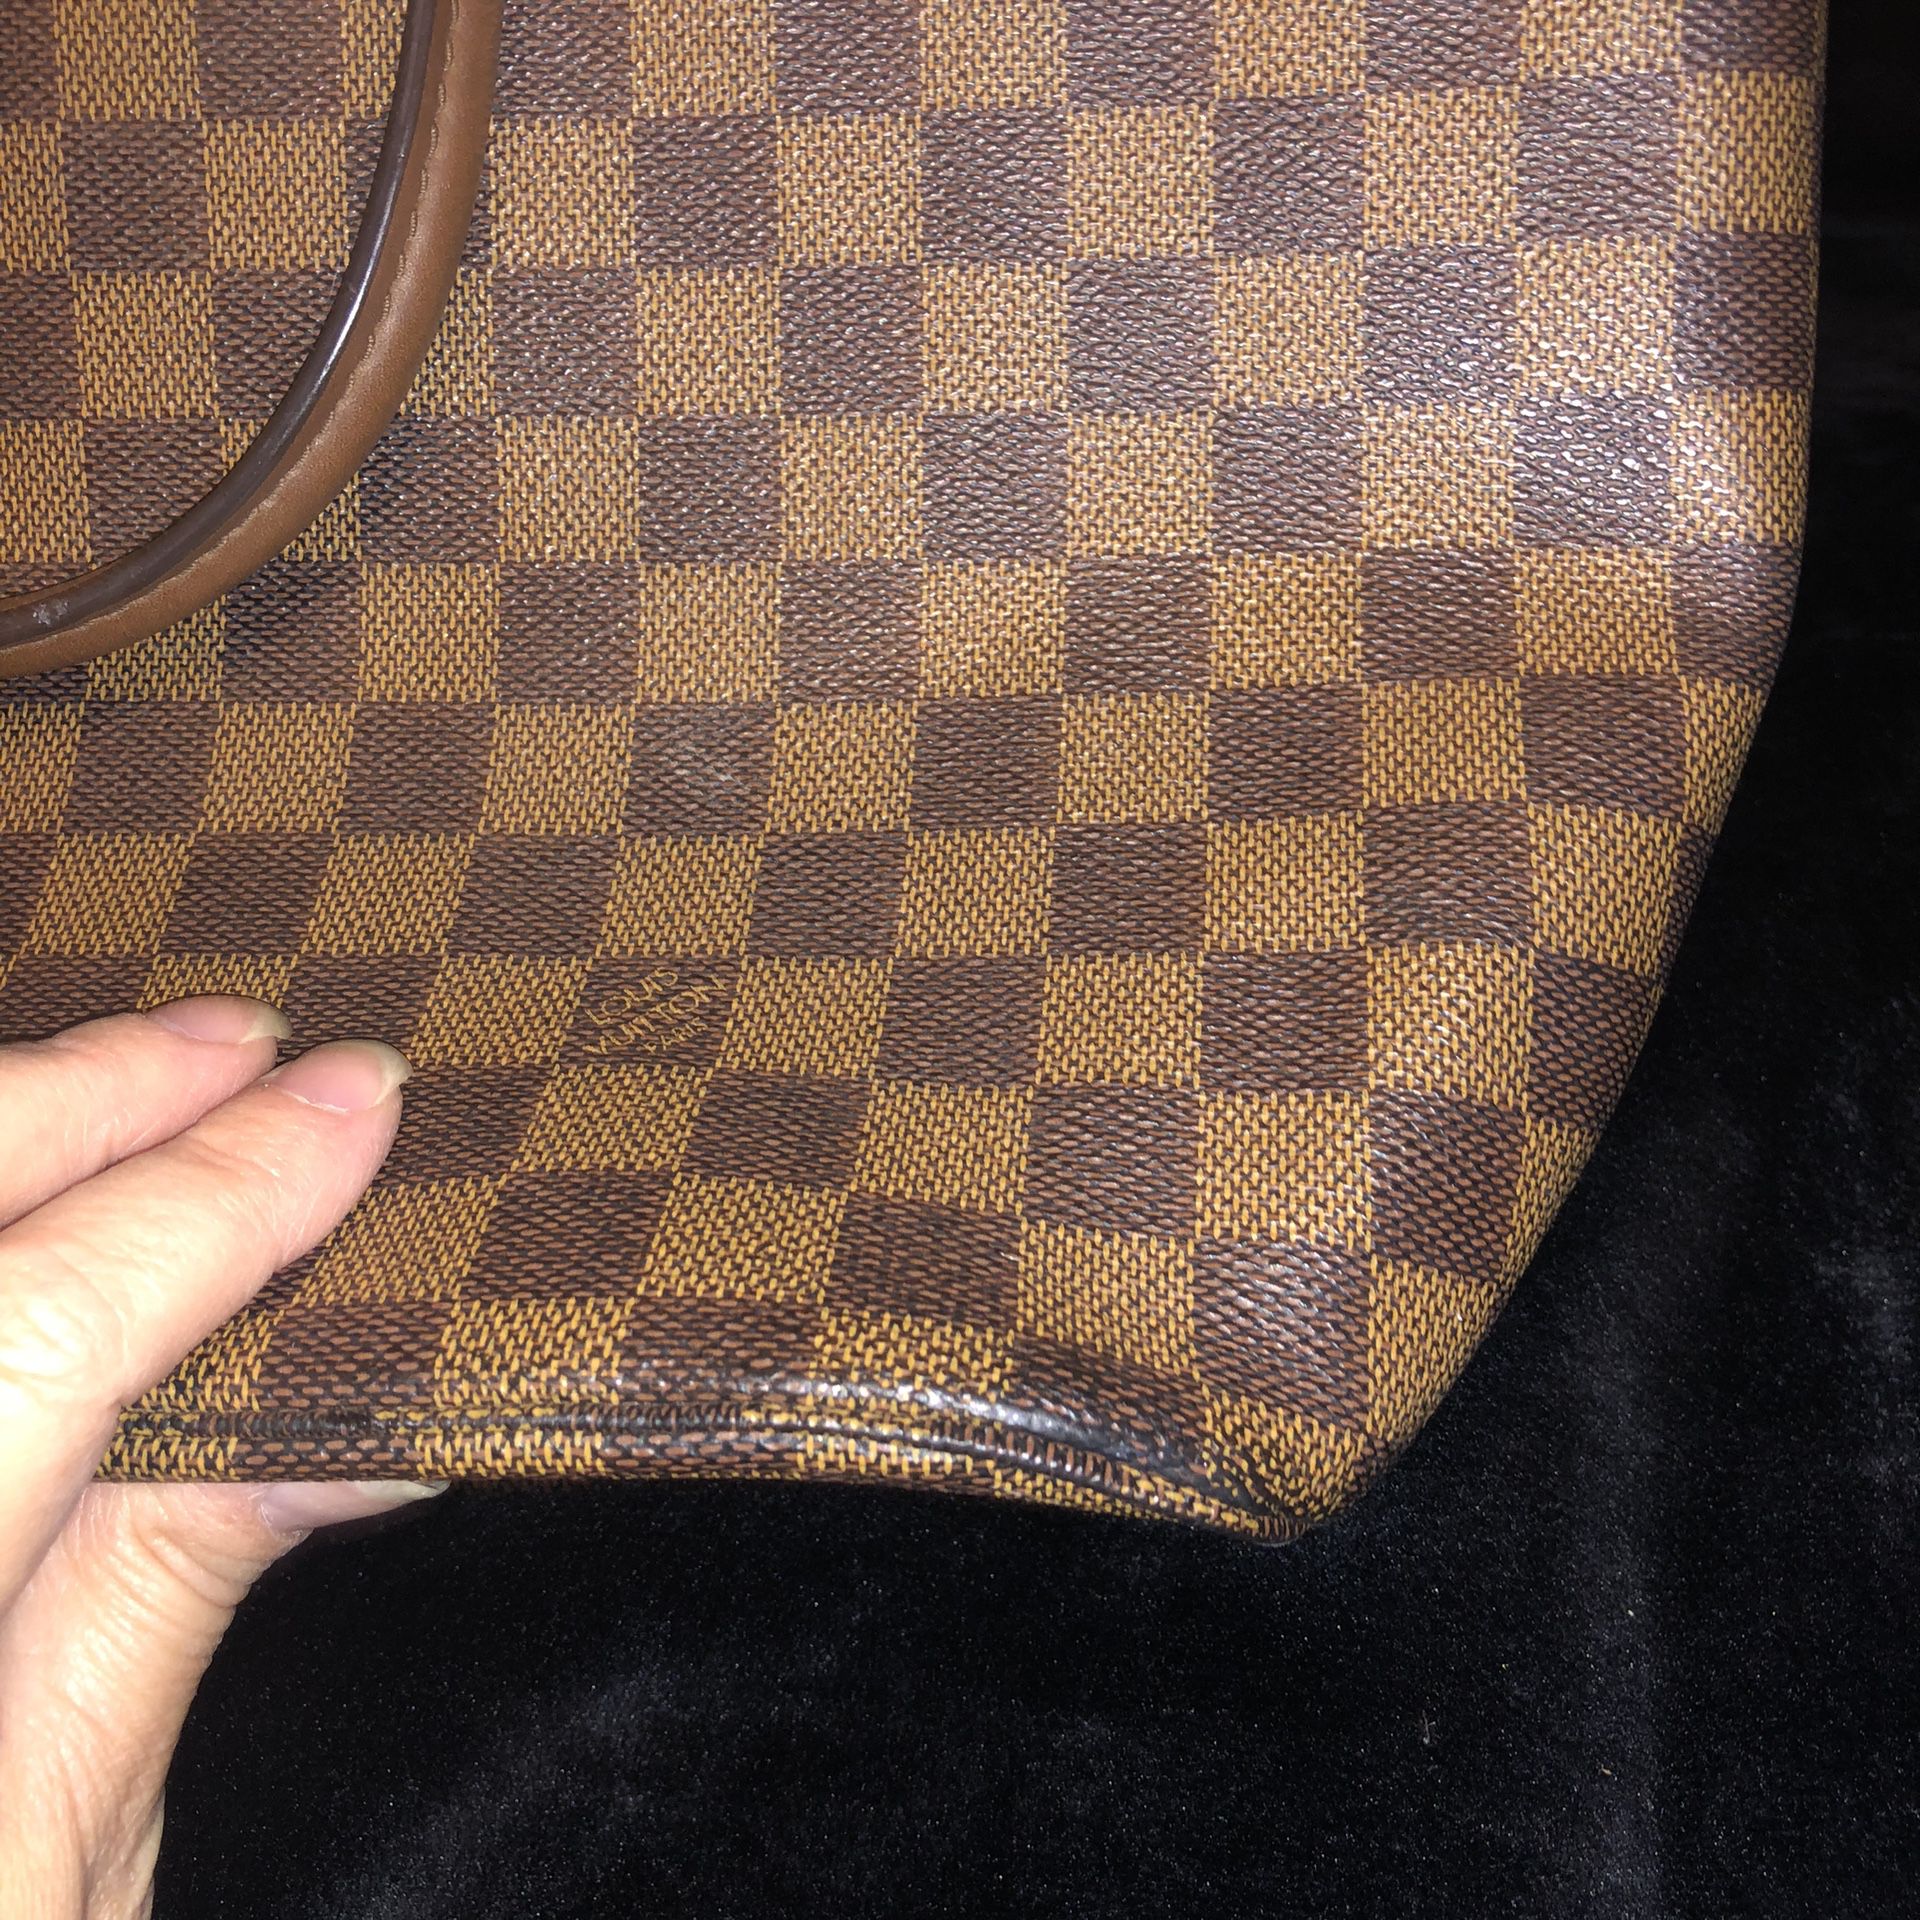 Authentic Louis Vuitton Belmont Bag for Sale in Lynbrook, NY